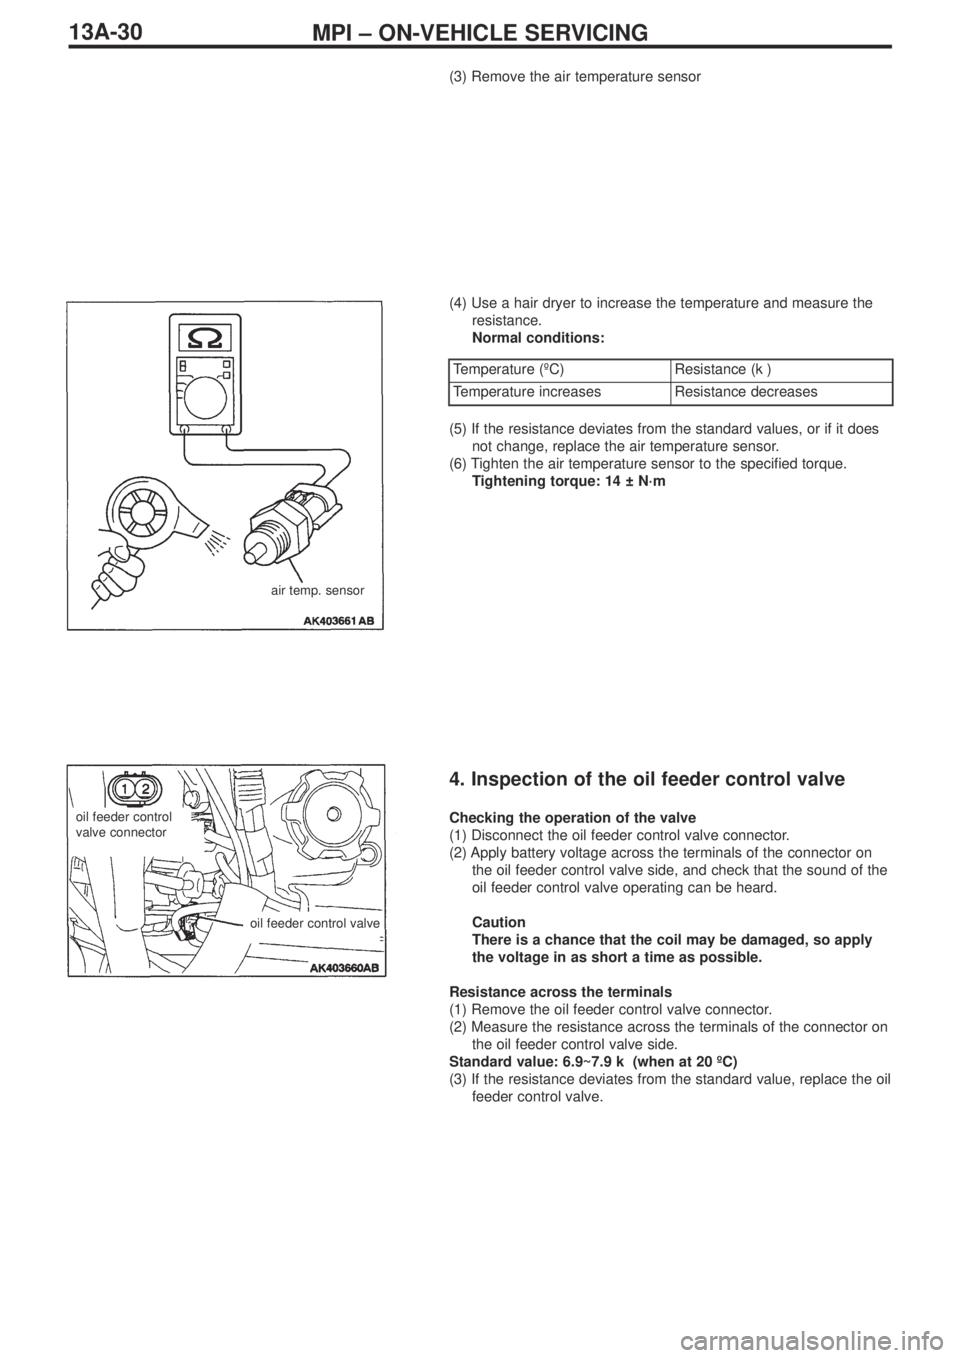 MITSUBISHI LANCER EVOLUTION IX 2005  Workshop Manual MPI – ON-VEHICLE SERVICING13A-30
(3) Remove the air temperature sensor
(4) Use a hair dryer to increase the temperature and measure the
resistance.
Normal conditions:
air temp. sensor
Temperature (�